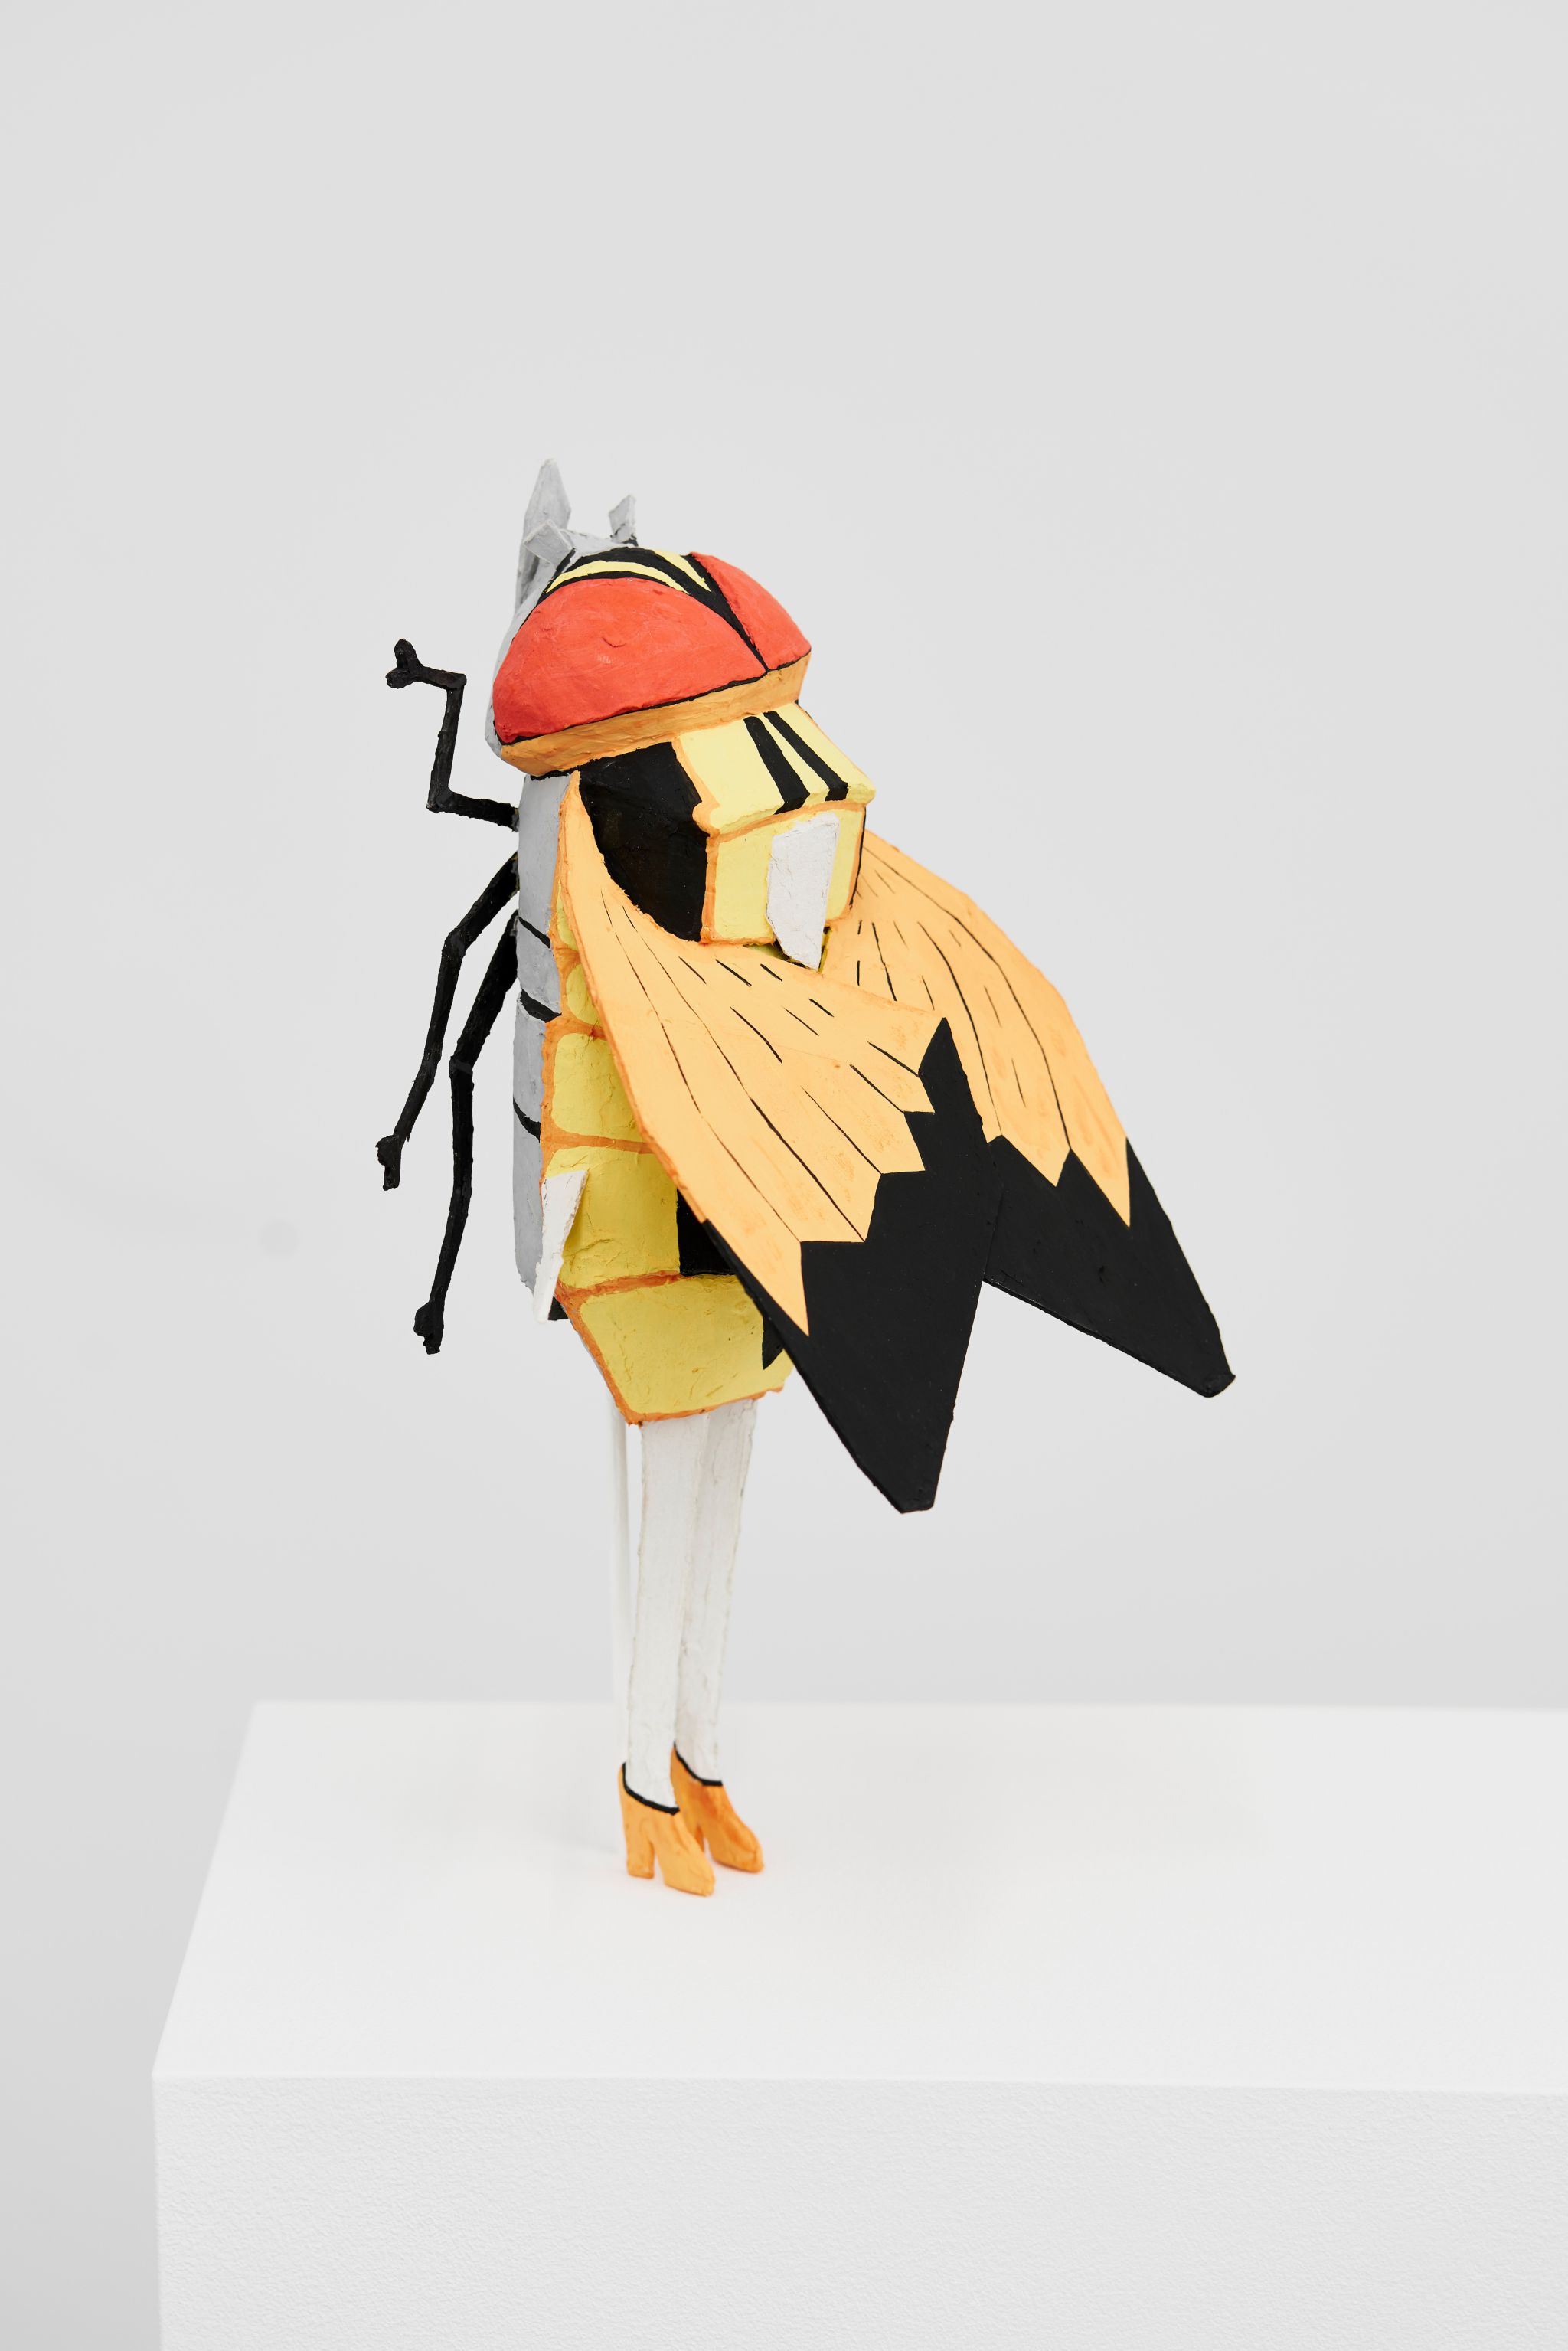 Jonathan Penca, Insect of the year 2014 (Goldschildfliege), 2018, Cardboard, paper-mâché, glue and gouache, 34 ⁠× ⁠17 ⁠× ⁠15 ⁠⁠cm